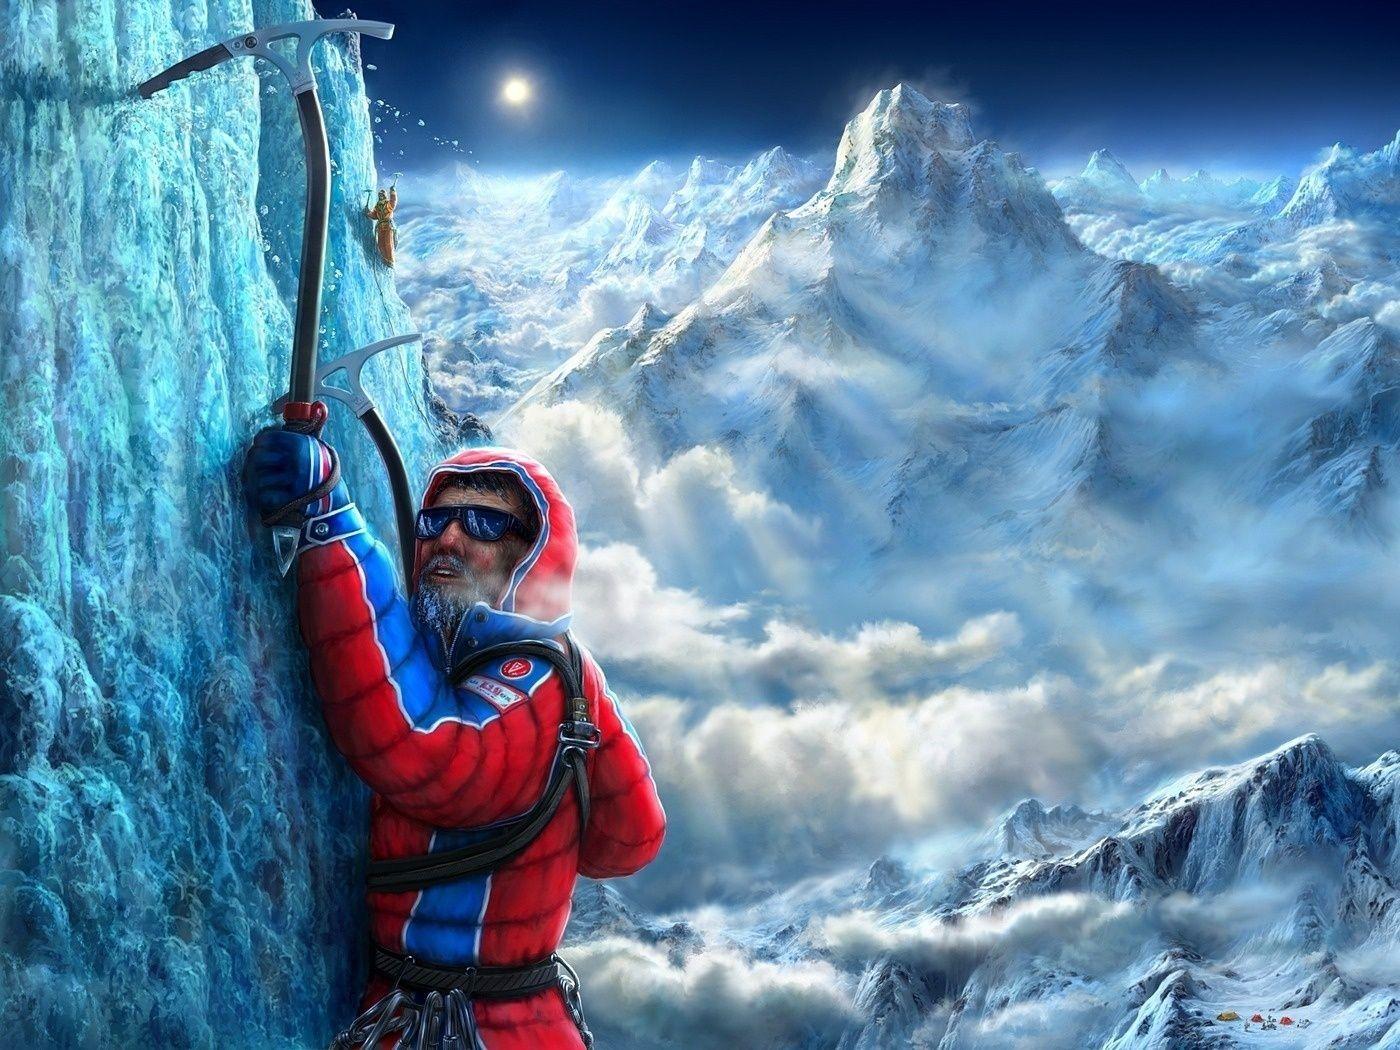 Find out: Ice Climbing wallpaper /ice